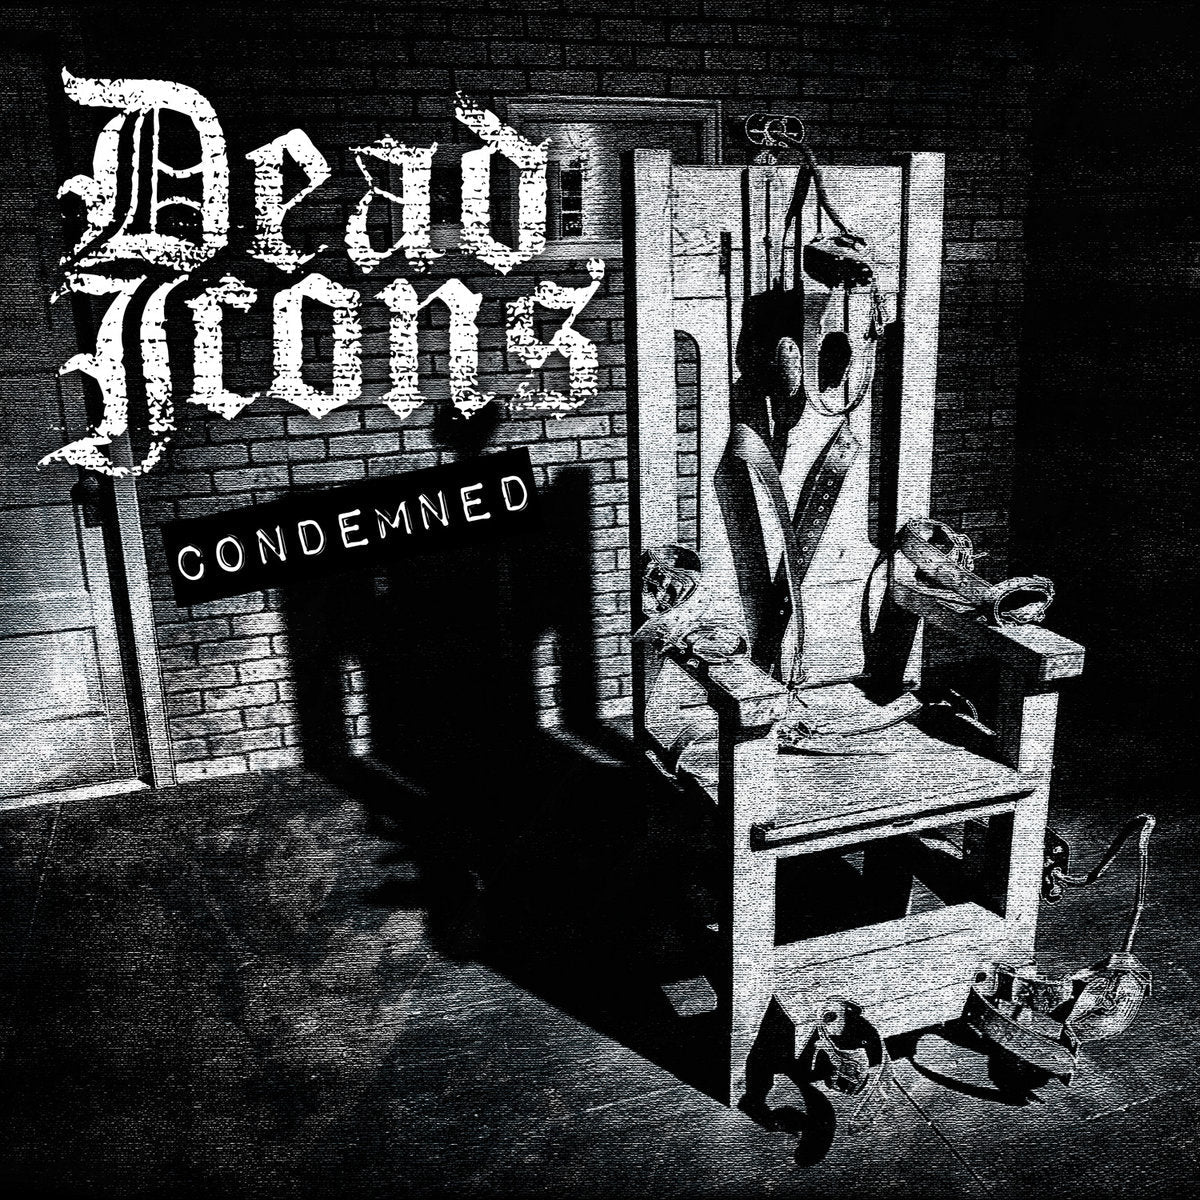 Dead Icons "Condemned" 12" Vinyl